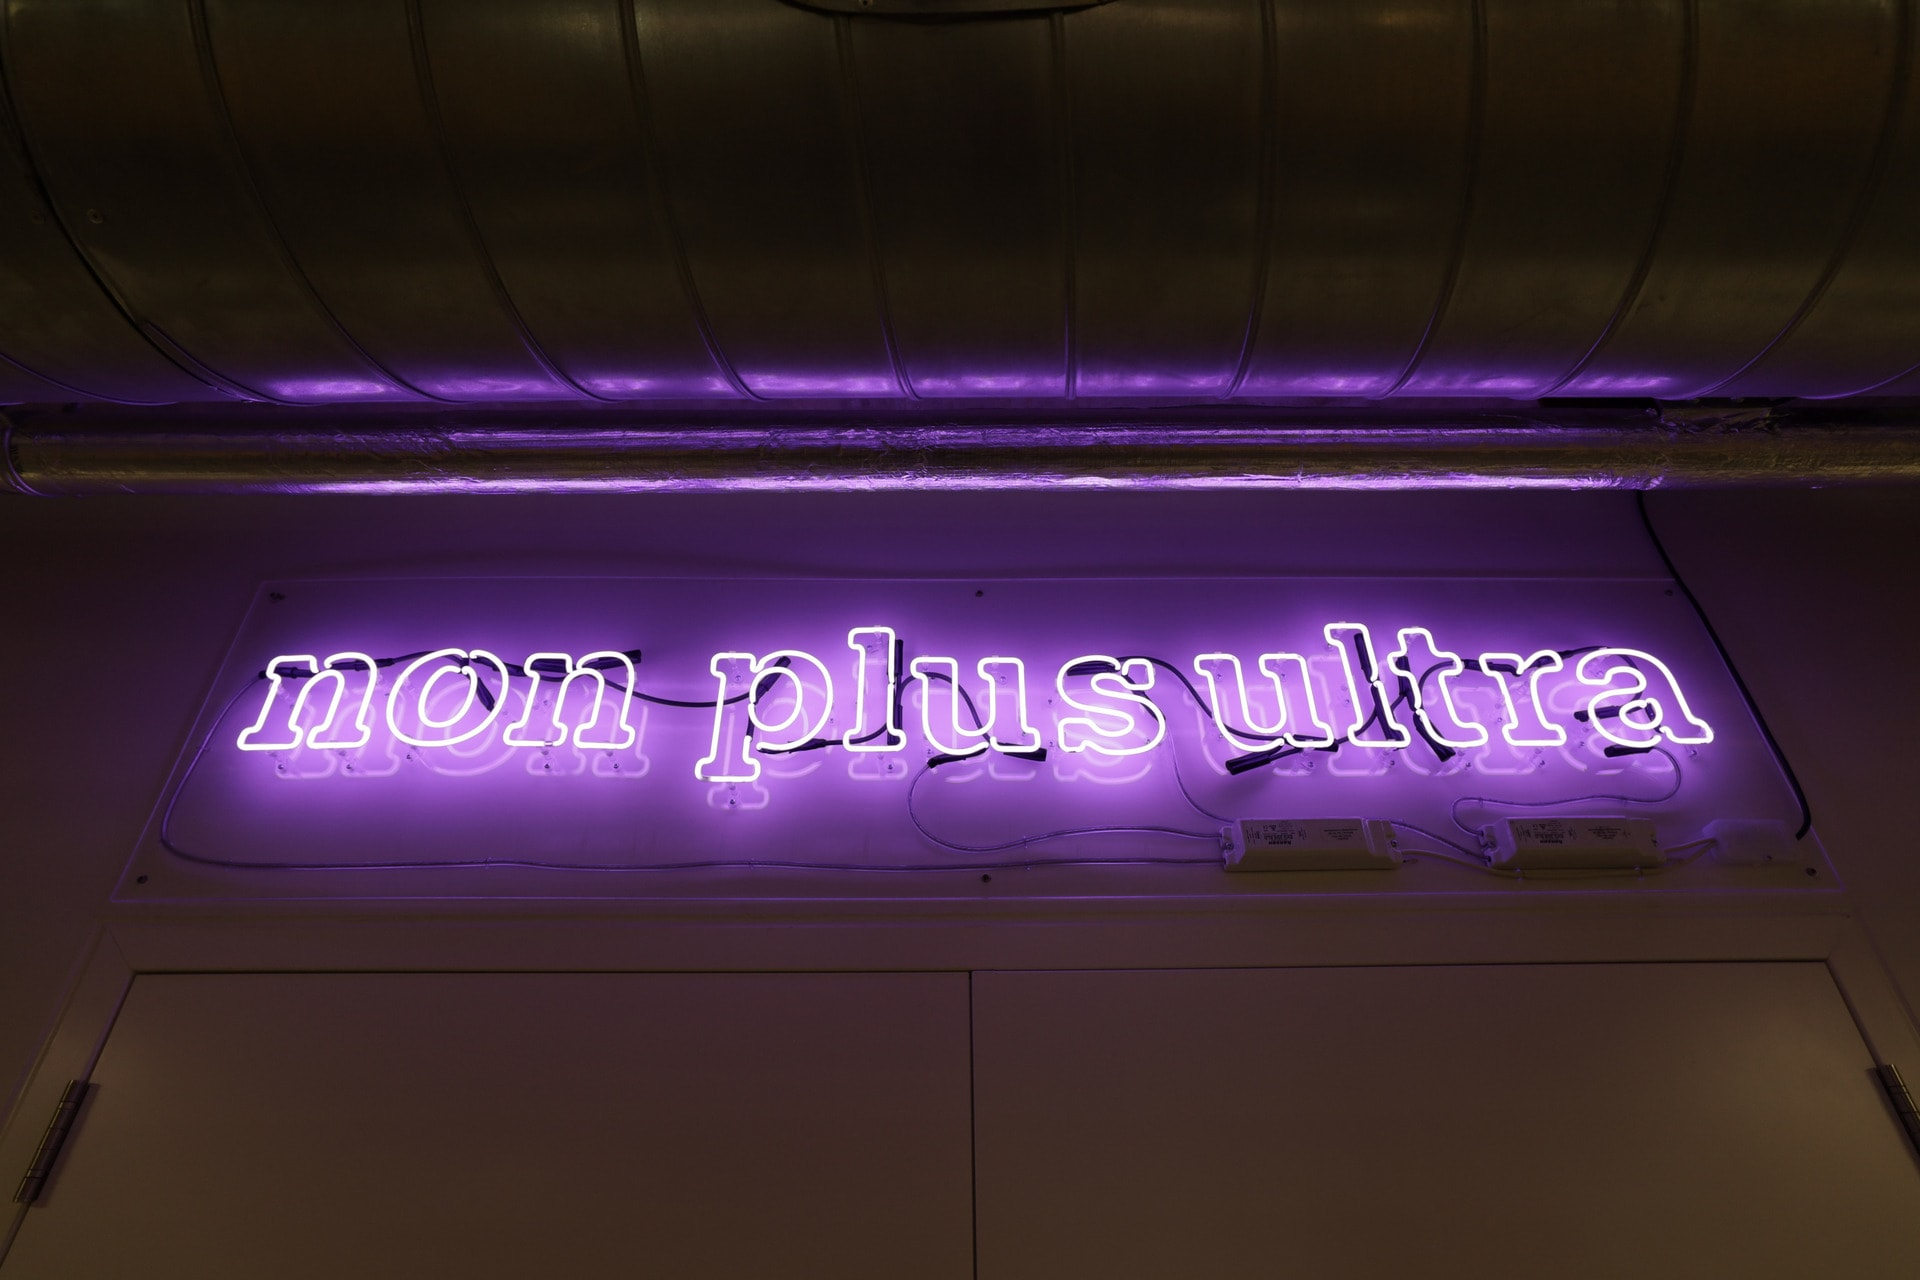 Image of a neon sign in white lettering on a purple background saying ‘Non Plus Ultra’ in an interior location.